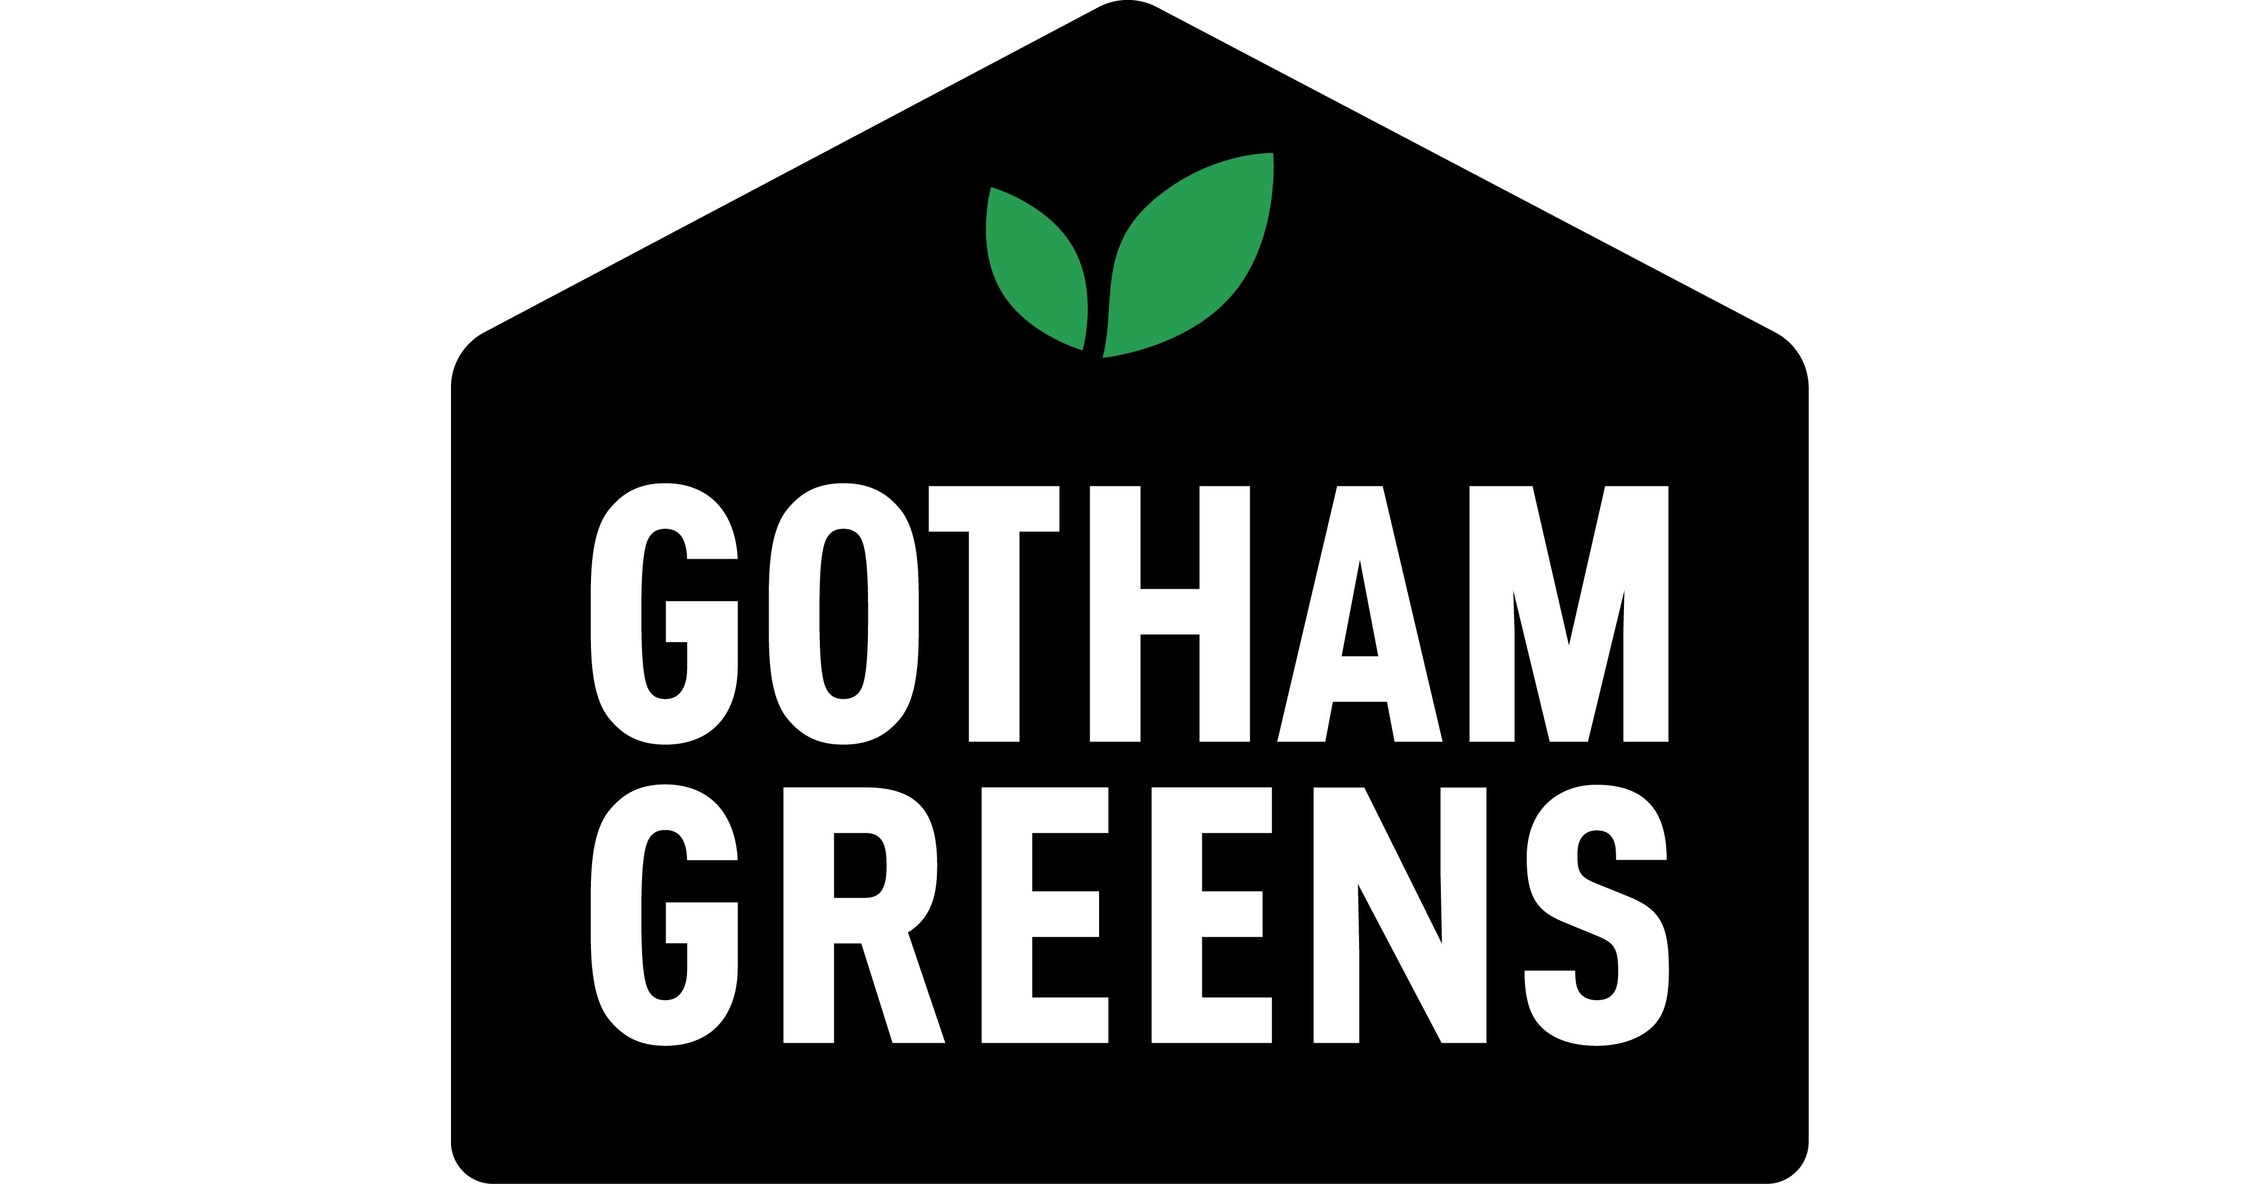 Gotham Greens secures more than $300 million in new capital